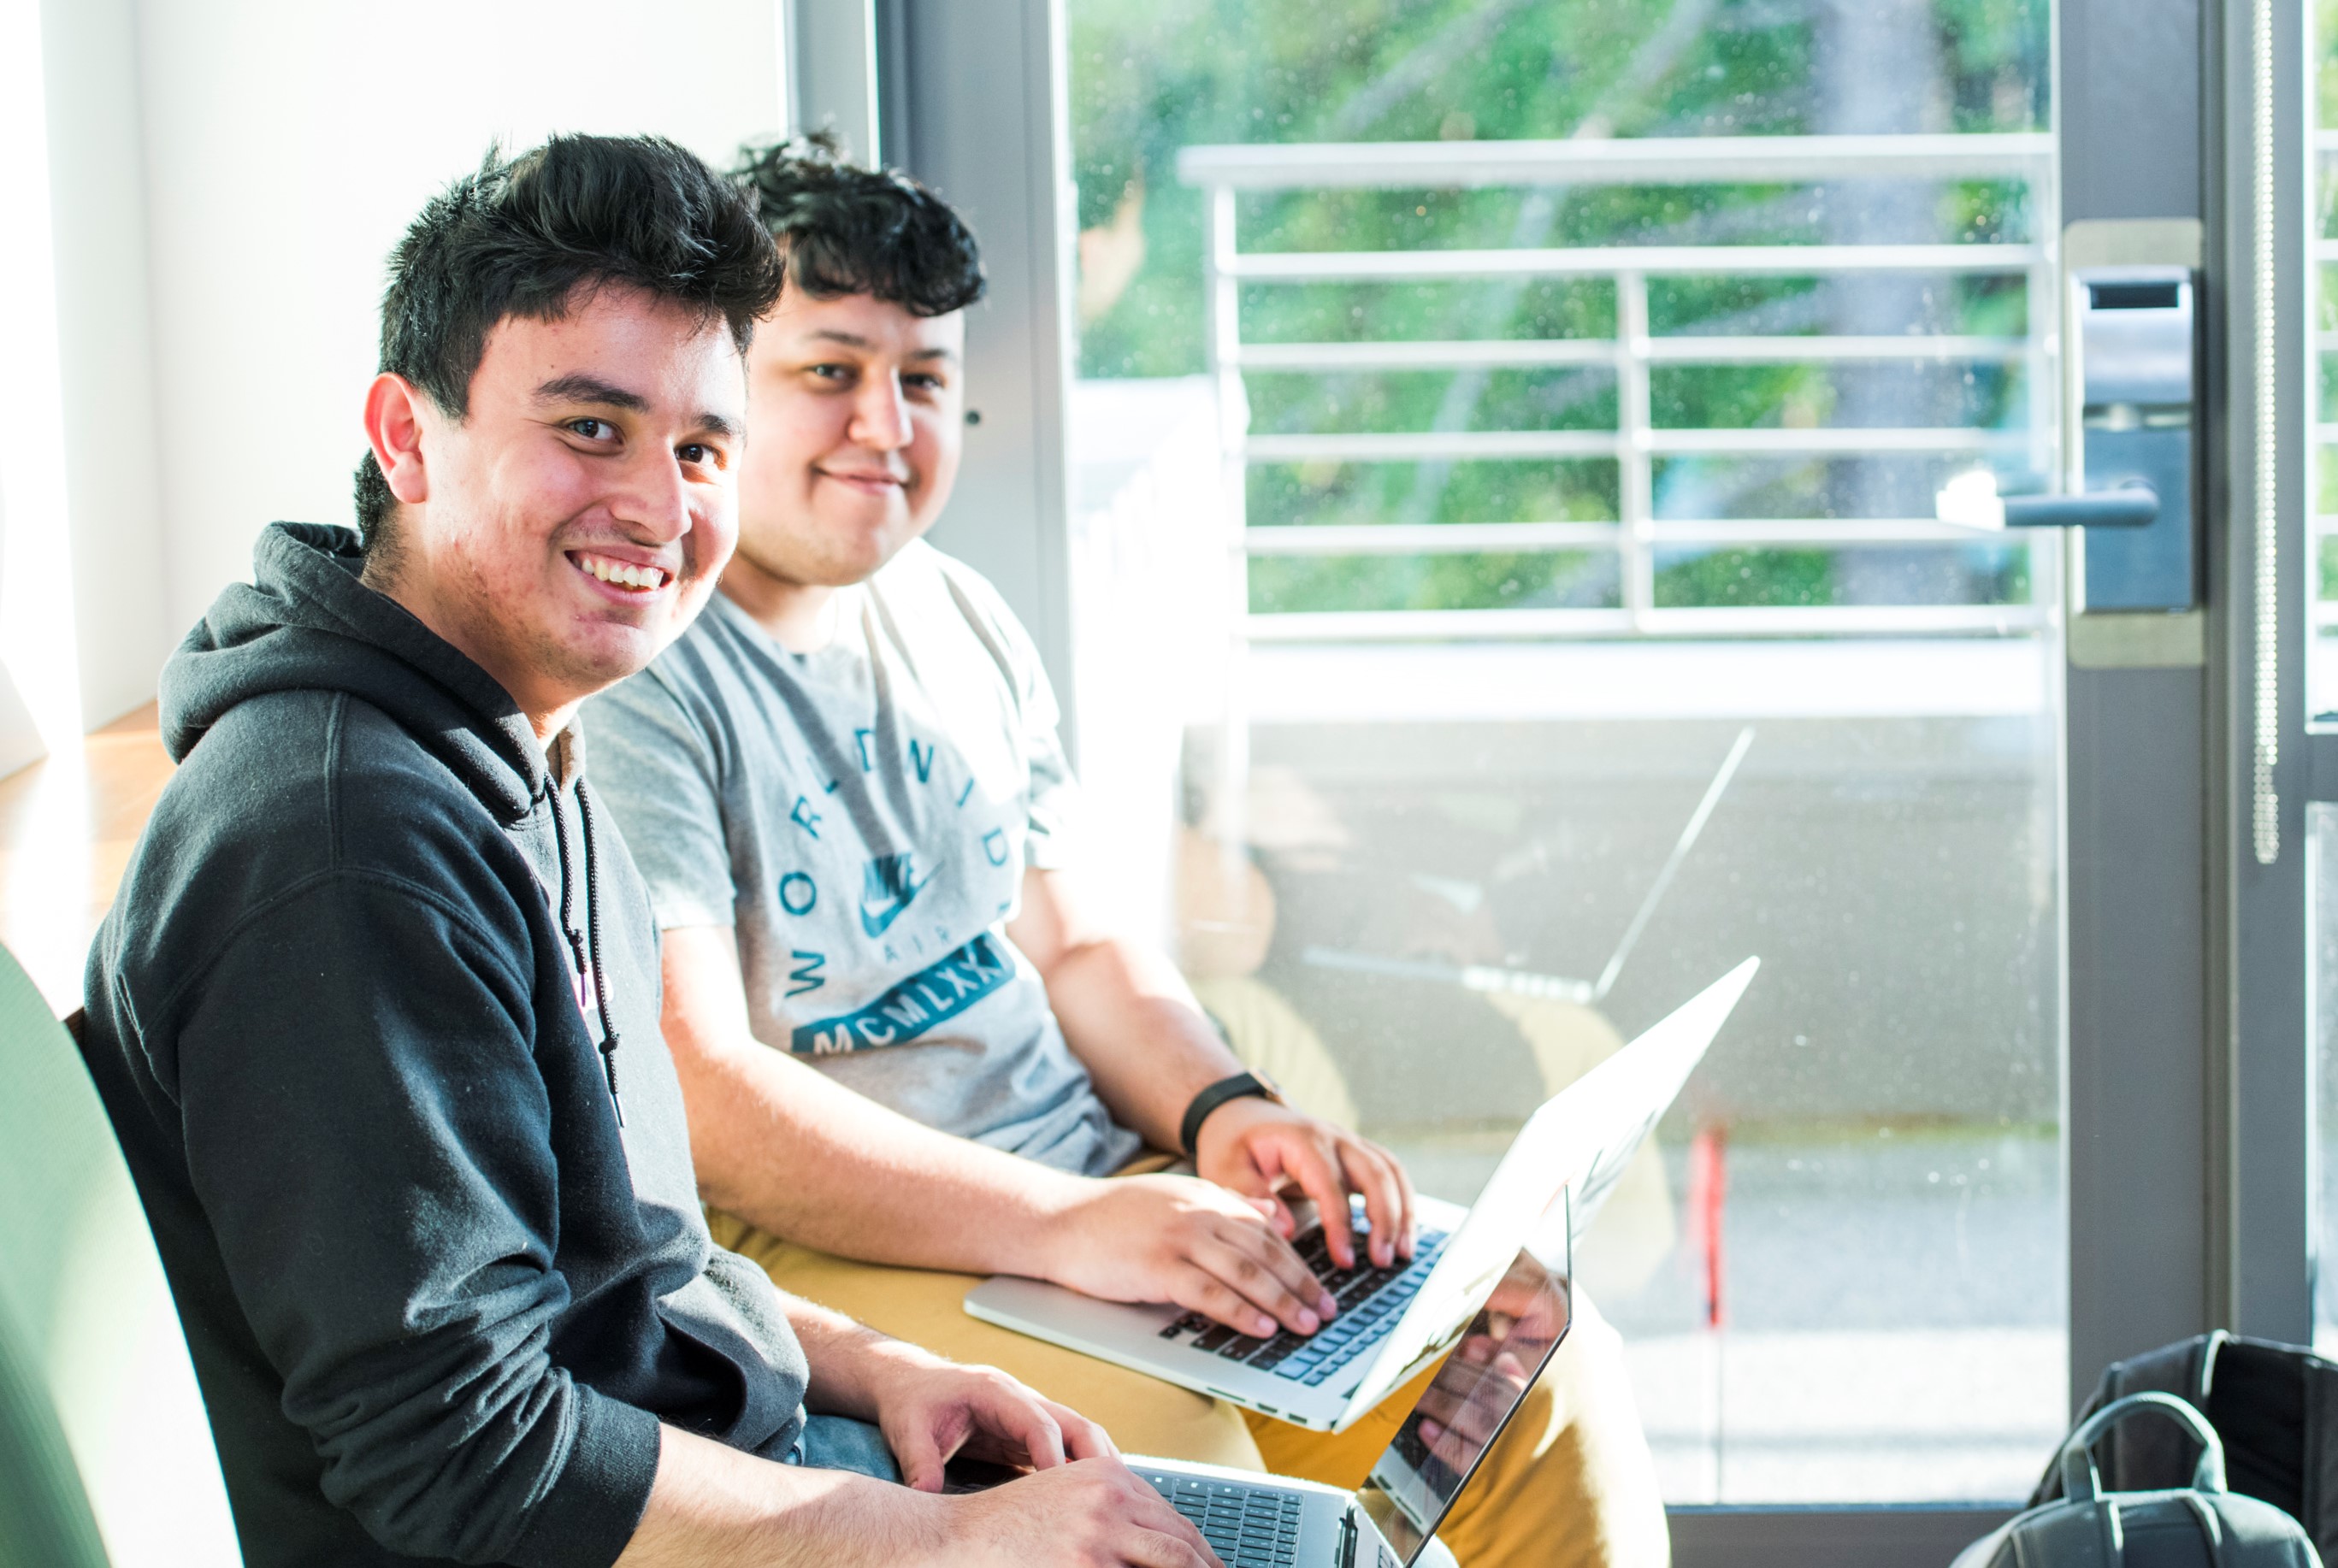 Two smiling college students balancing laptops on their laps.